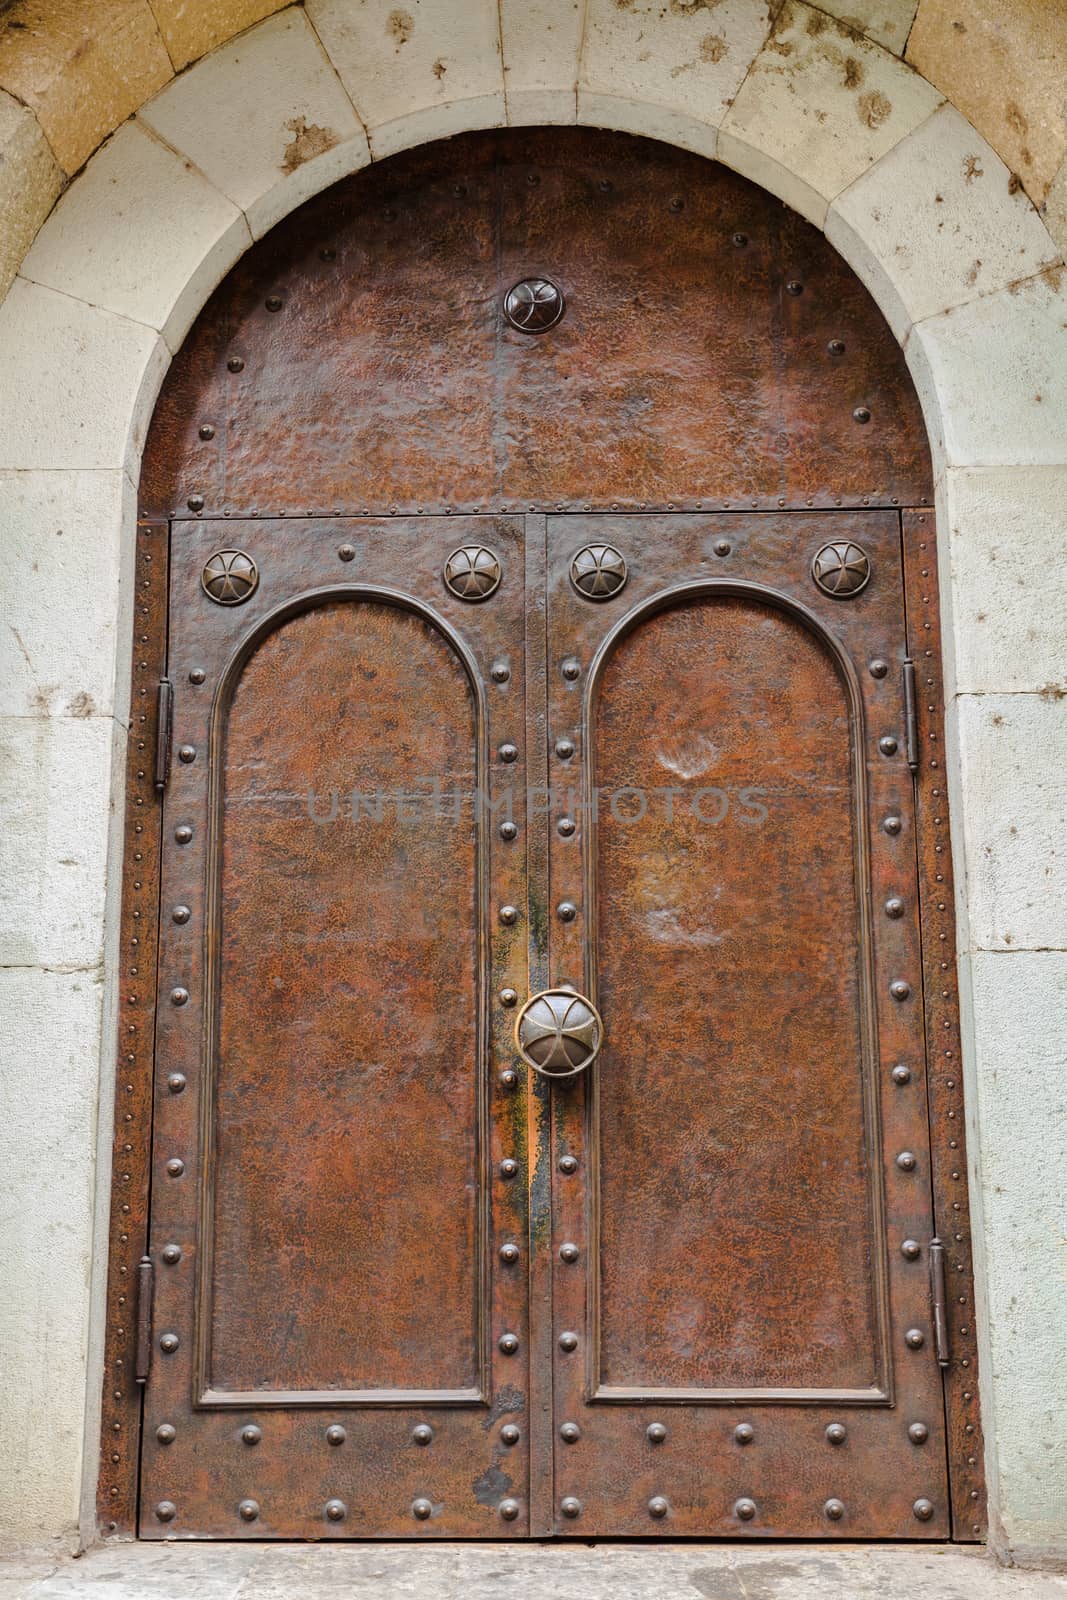 Door of the cathedral in Tbilisi, Georgia